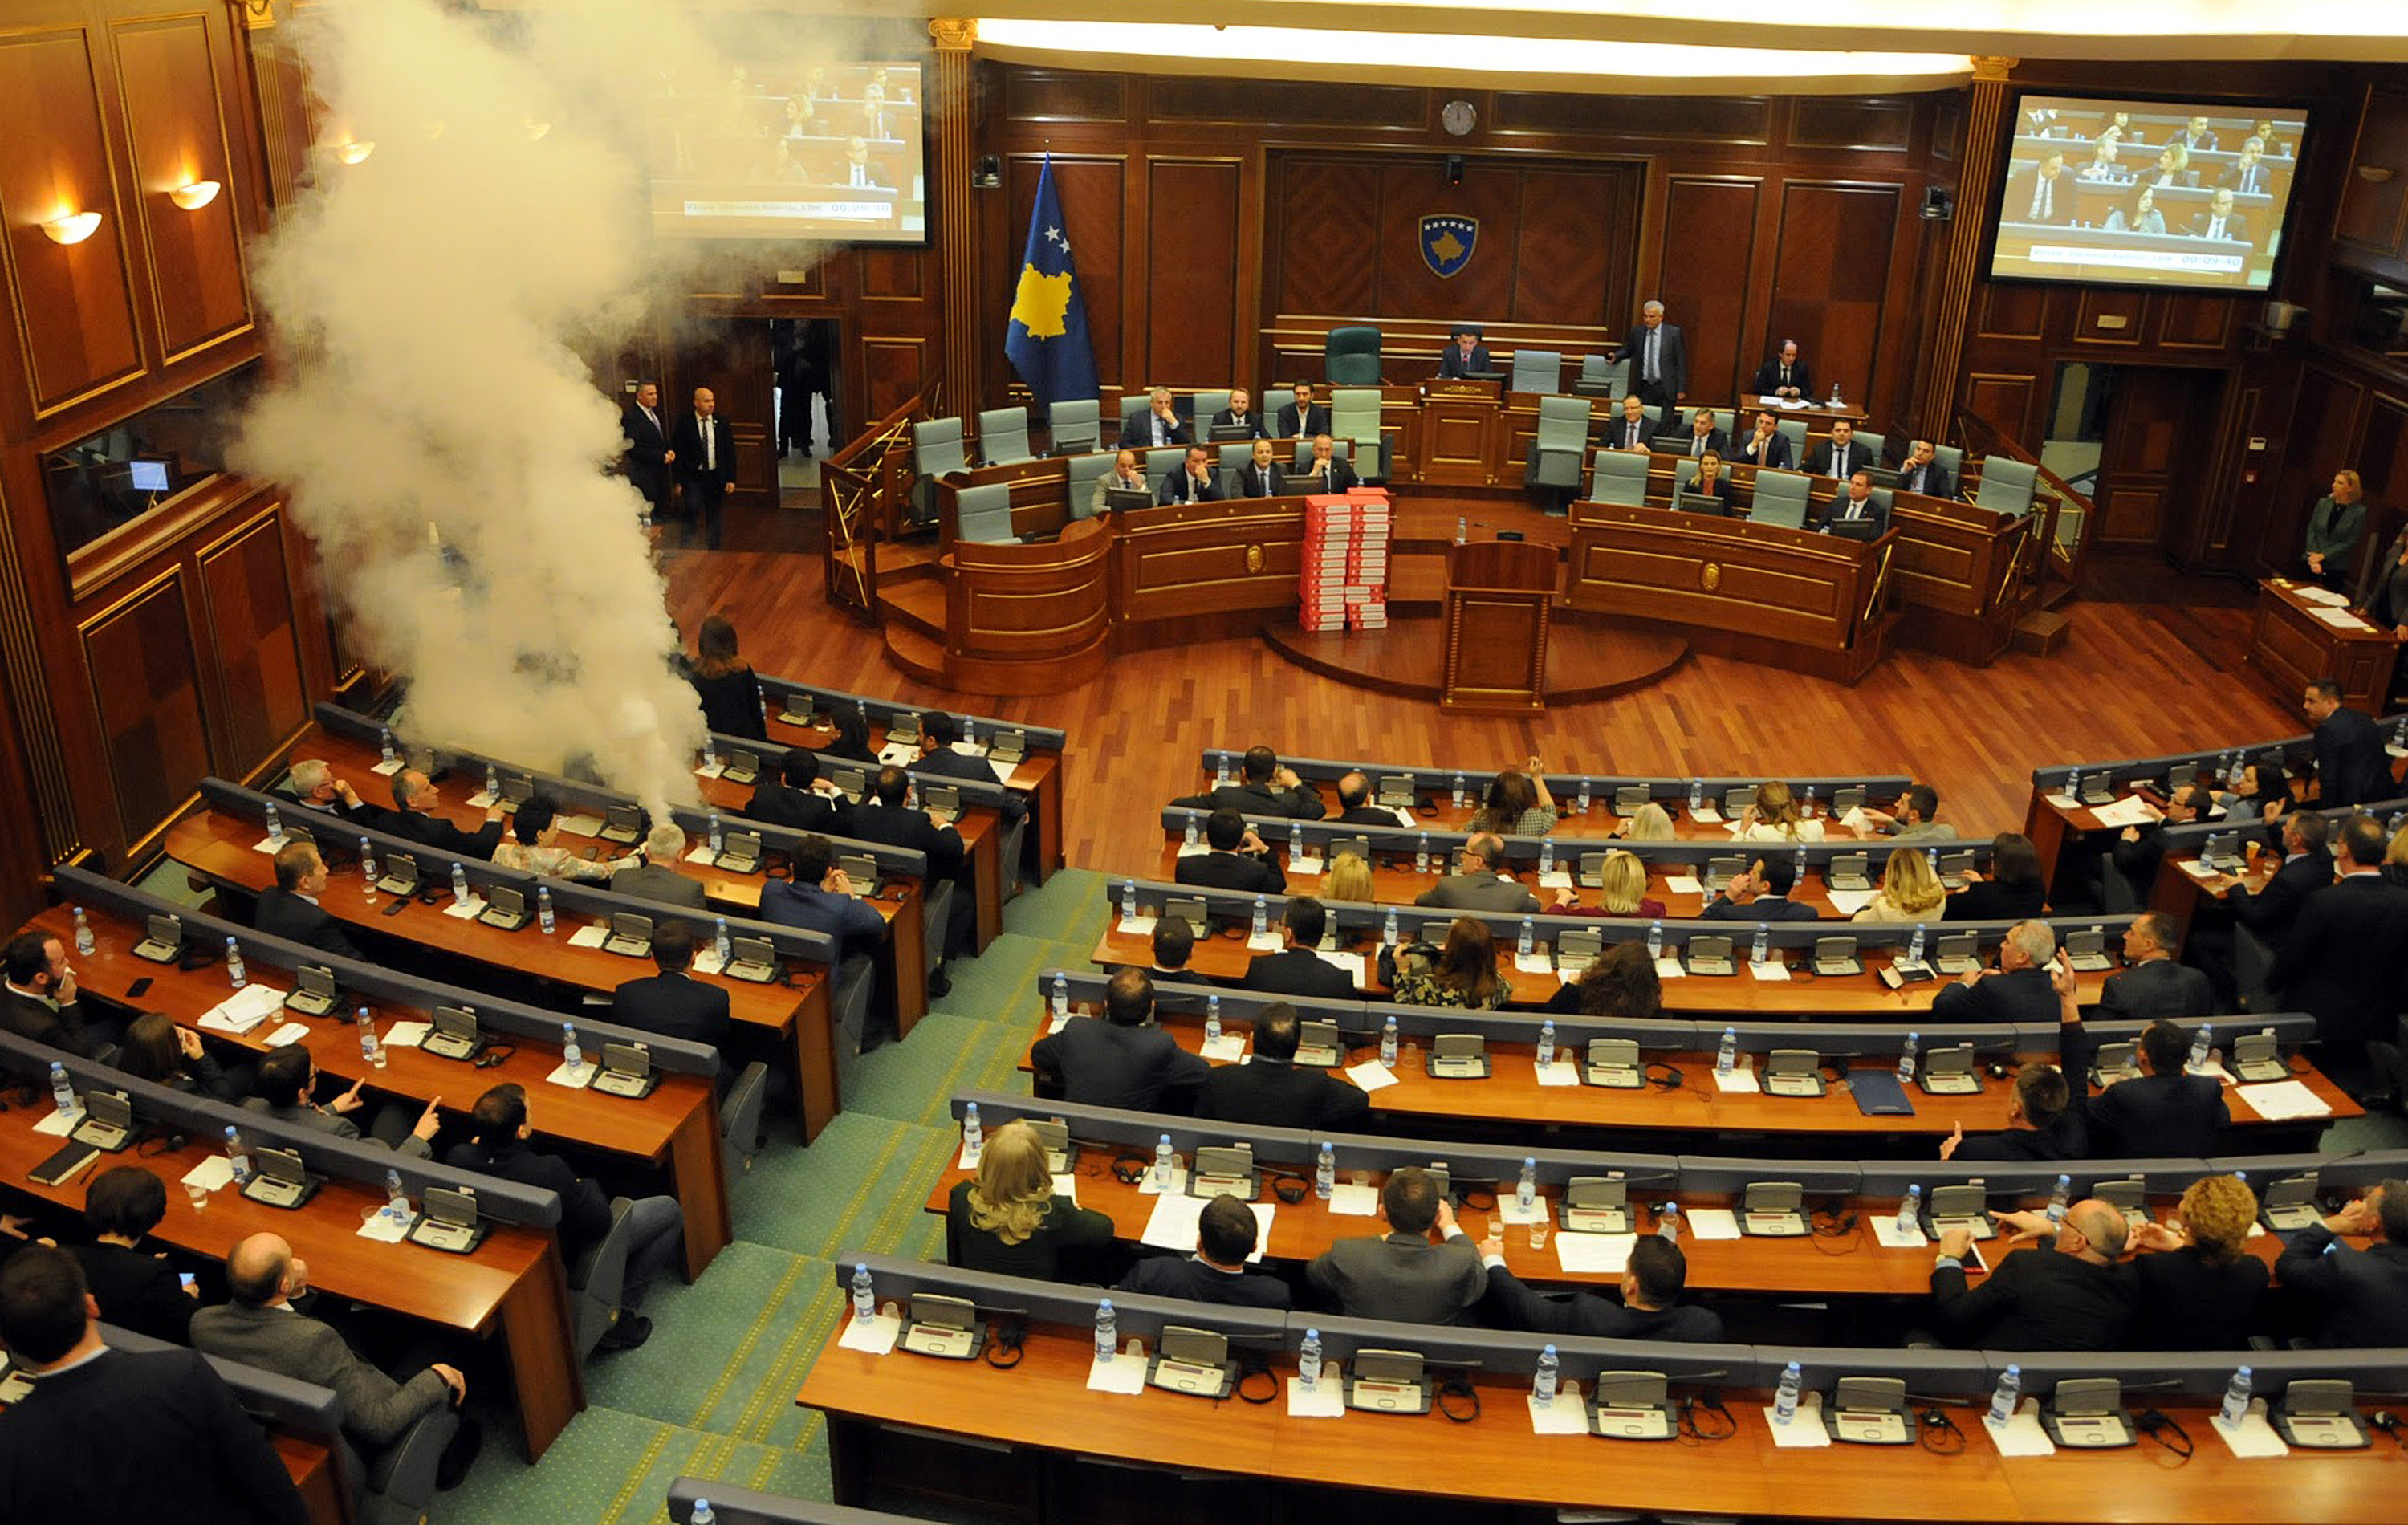 Kosovo opposition use teargas in parliament to delay vote on Montenegro border deal